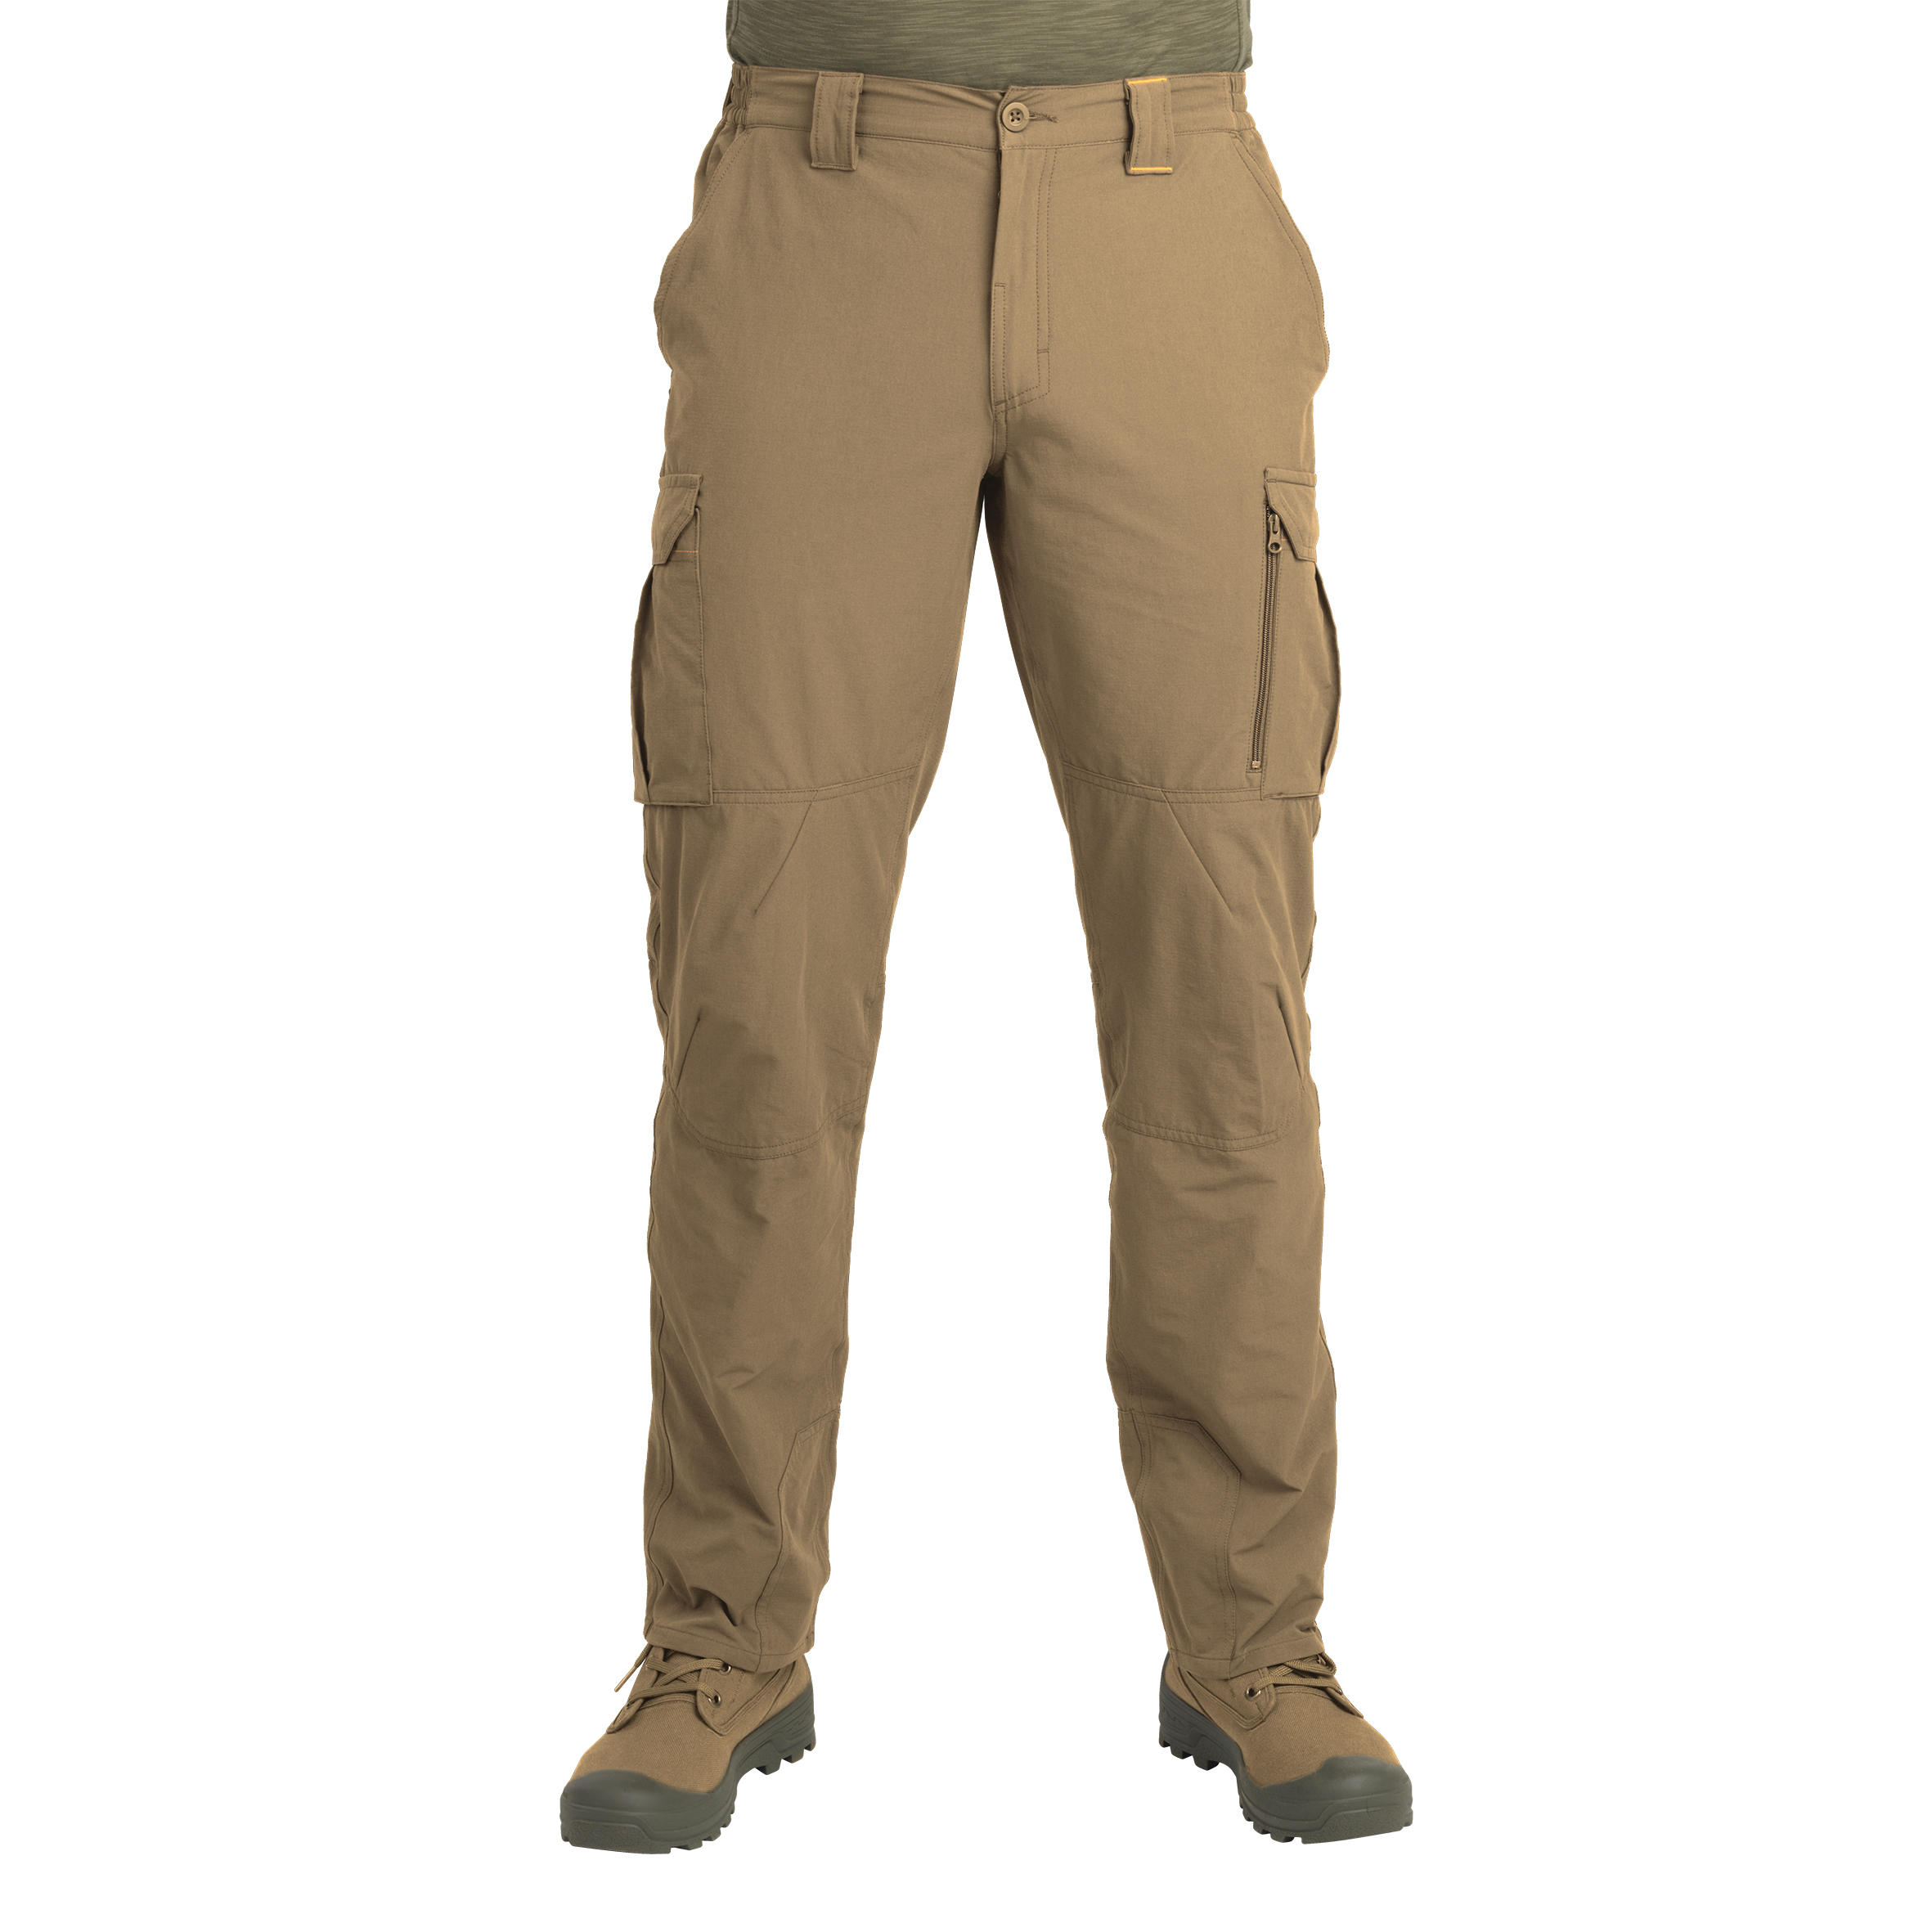 500 Hunting Lightweight Breathable Pants - Men